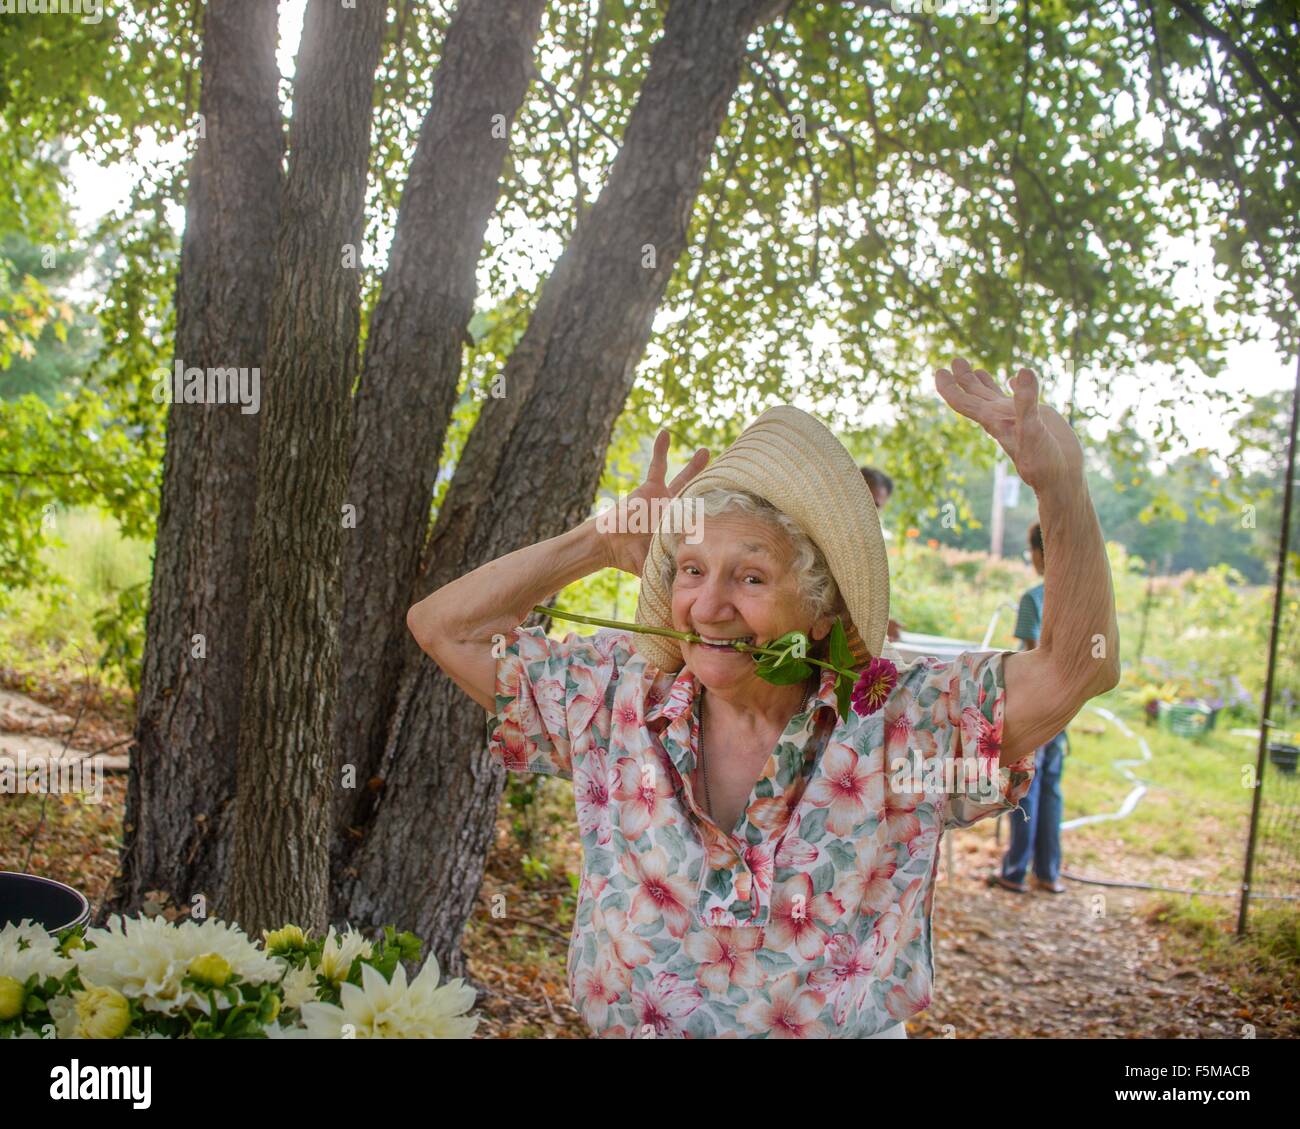 Senior woman with flower in mouth dancing on farm Stock Photo